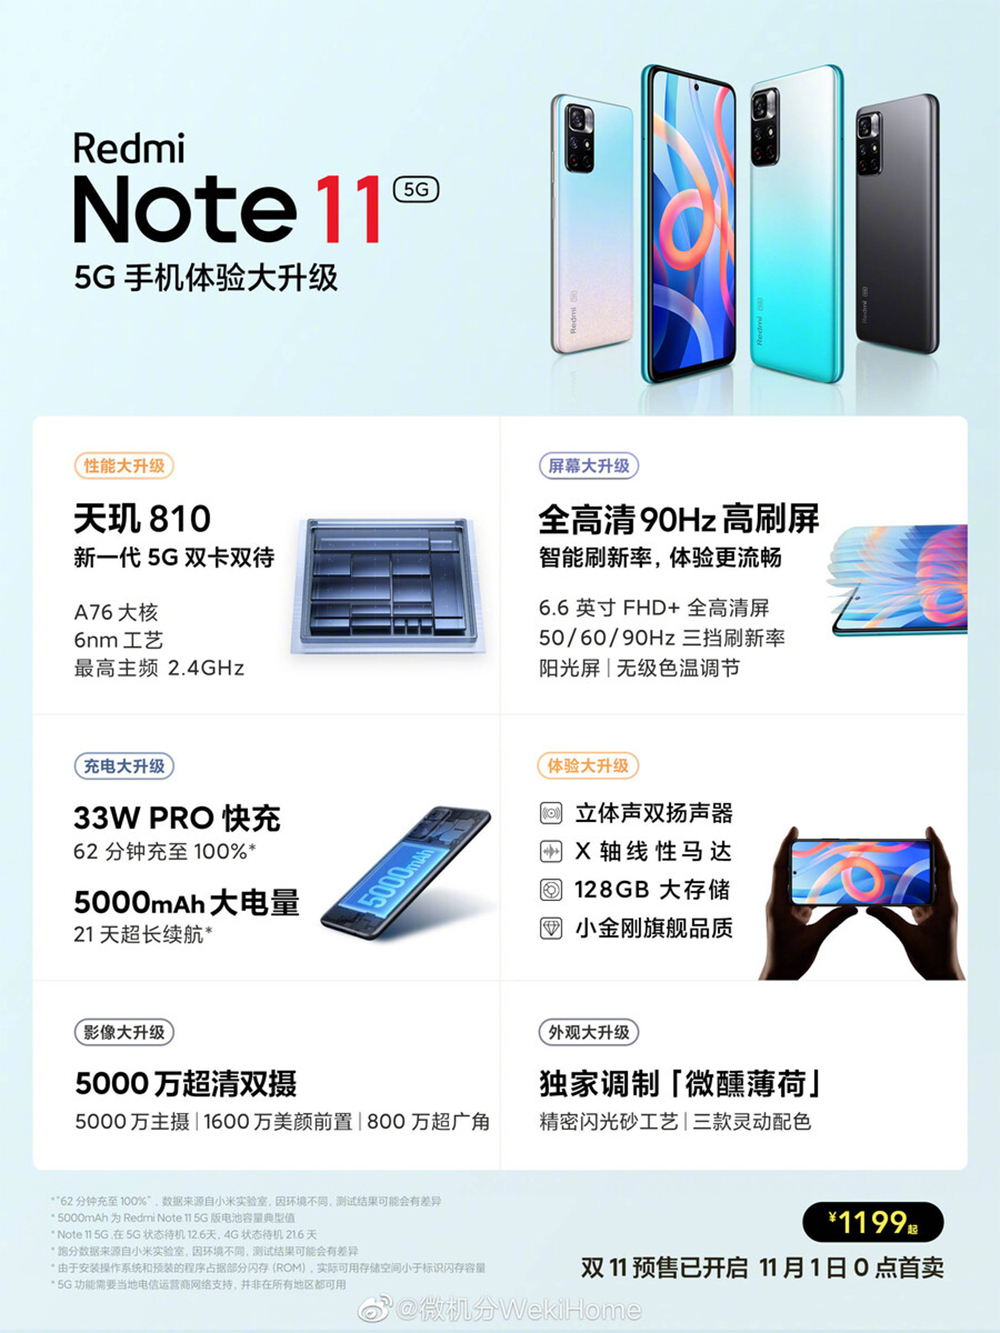 Note 11 2